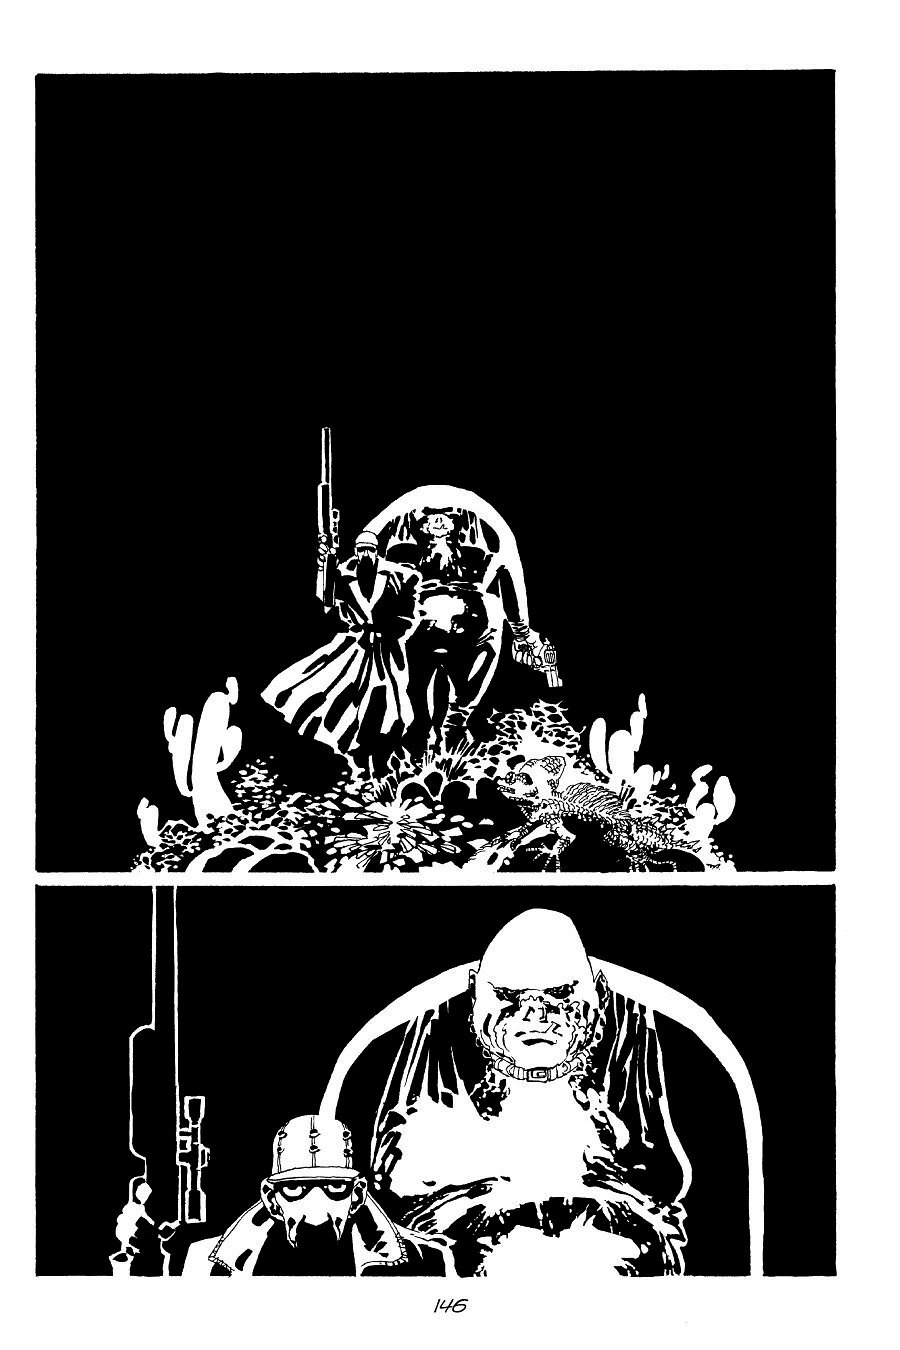 page 146 of sin city 6 booze broads and bullets